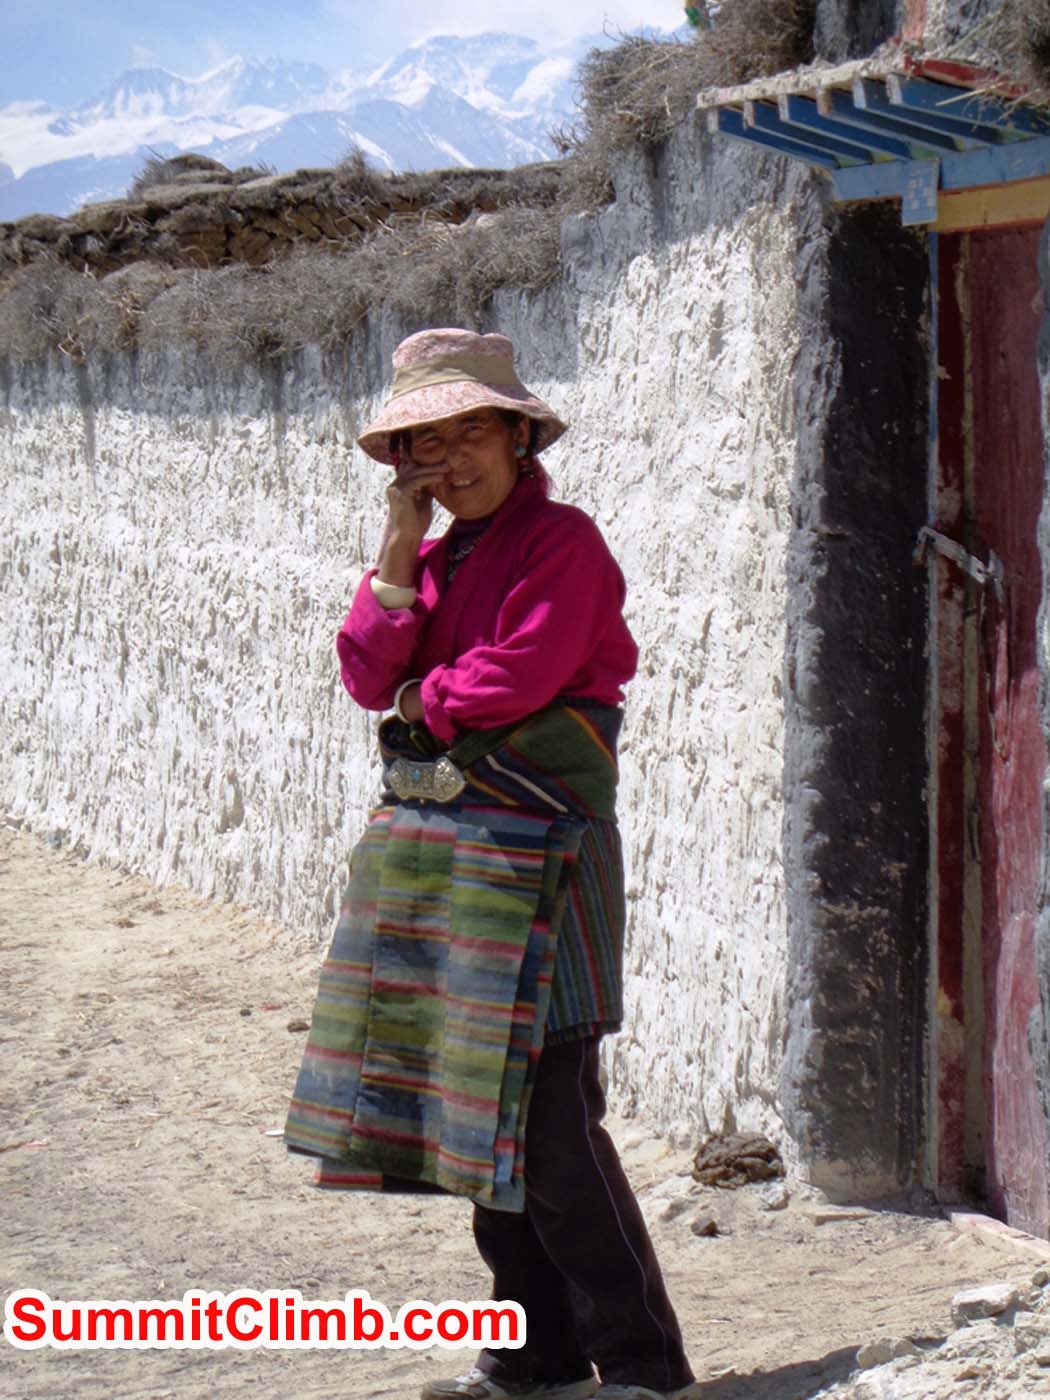 Tibetan plateau woman stands outside her house with Mount Cho Oyu and Everest in the background. Sacha Guittet photo